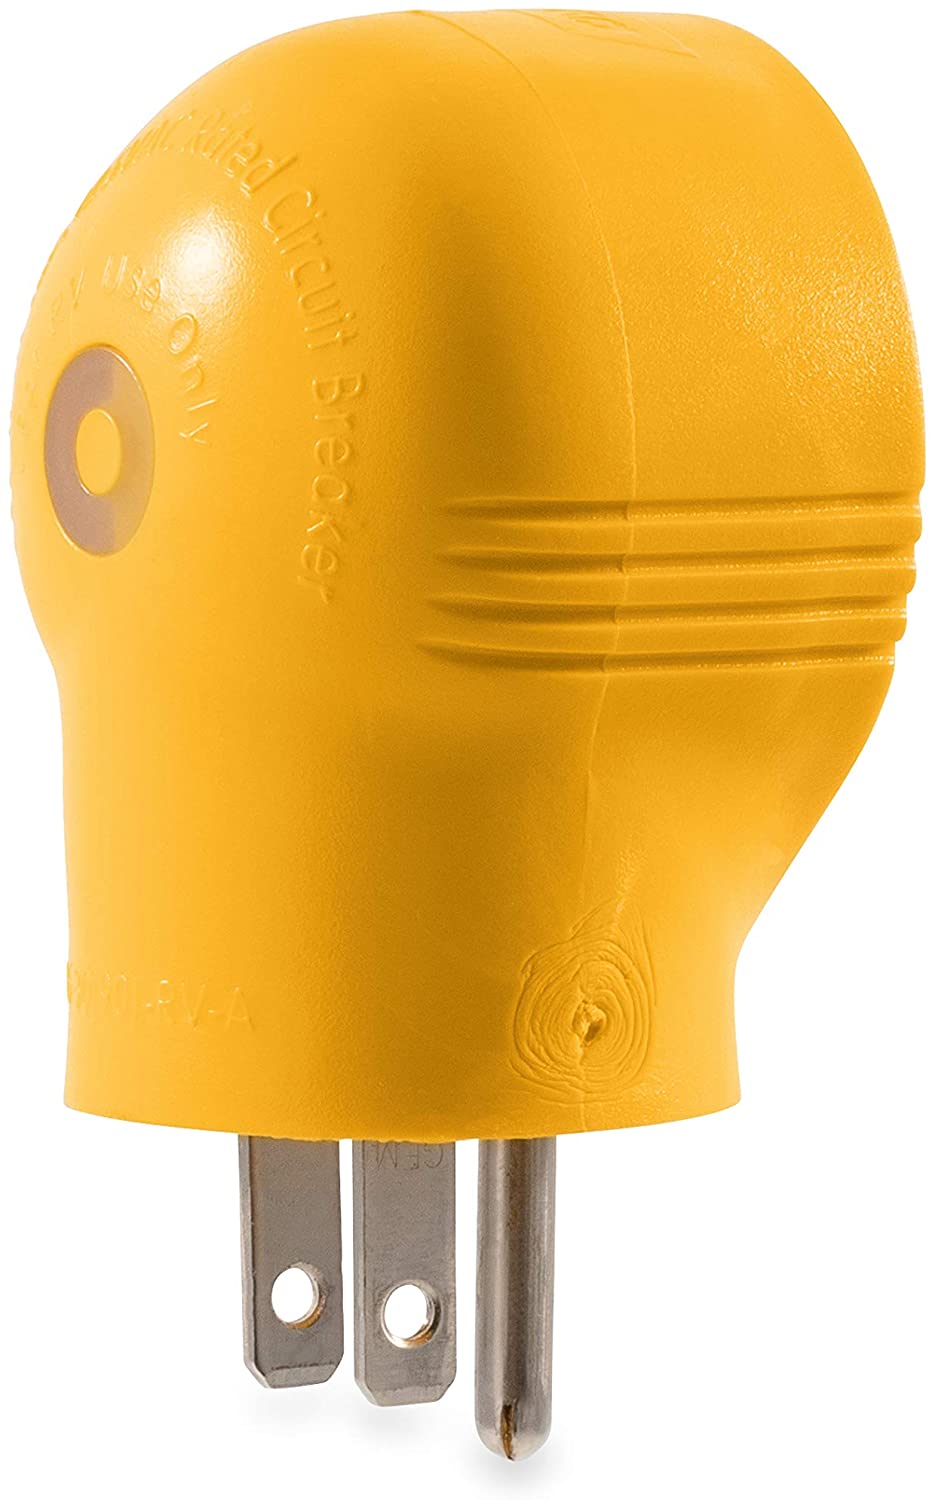 Camco 15Amp Male to 30Amp Female 90 Degree Electrical Adapter 55325